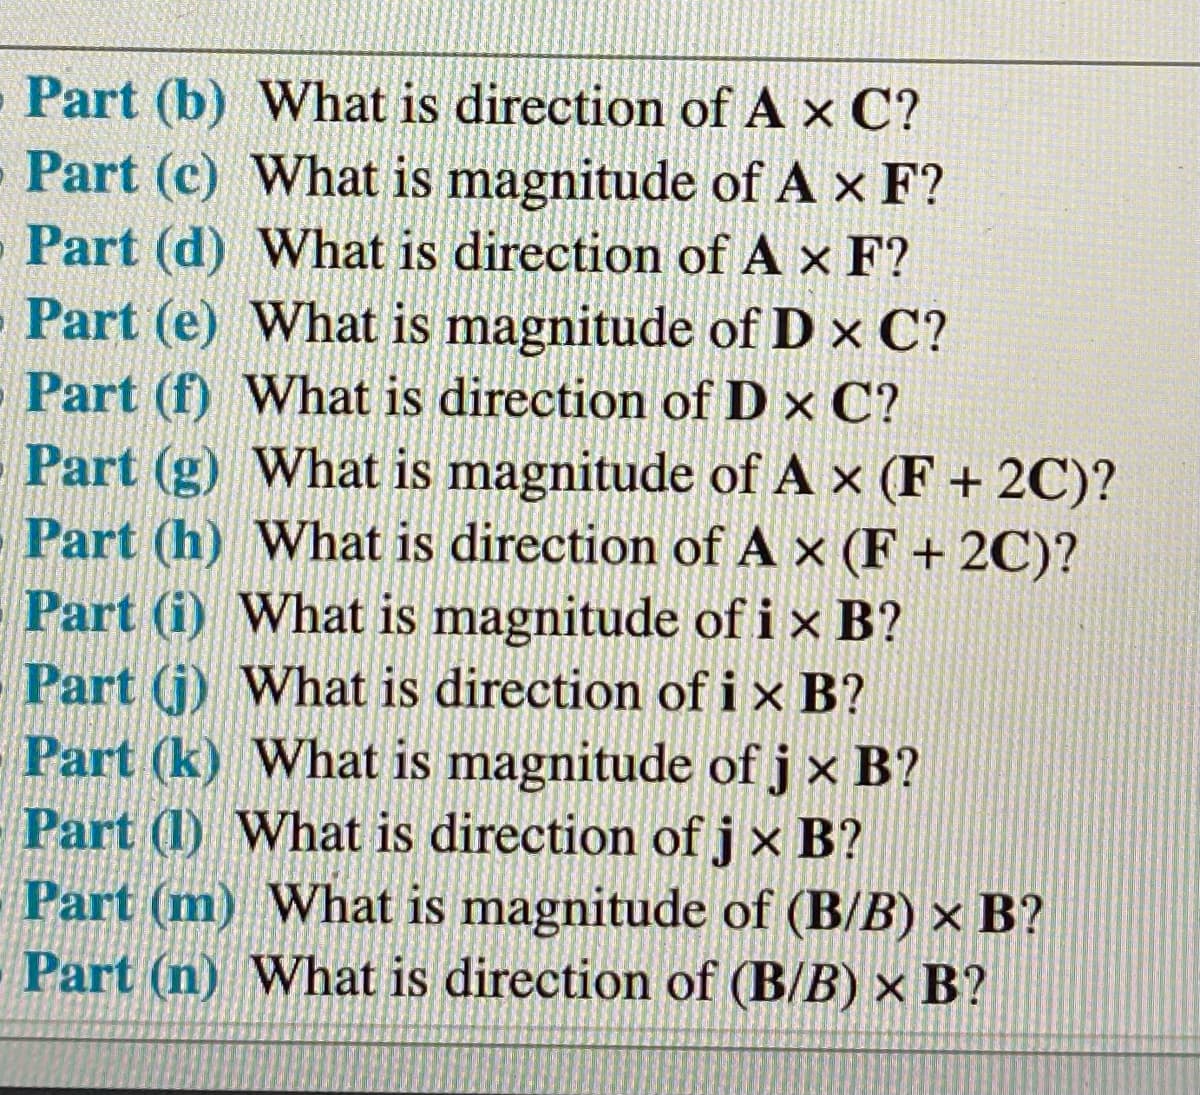 Part (b) What is direction of A x C?
Part (c) What is magnitude of A x F?
- Part (d) What is direction of A x F?
- Part (e) What is magnitude of D x C?
Part (f) What is direction of D x C?
Part (g) What is magnitude of A x (F + 2C)?
Part (h) What is direction of A x (F + 2C)?
Part (i) What is magnitude of ix B?
Part (j) What is direction of ix B?
Part (k) What is magnitude of j x B?
Part (1) What is direction of j x B?
Part (m) What is magnitude of (B/B) × B?
Part (n) What is direction of (B/B) × B?
